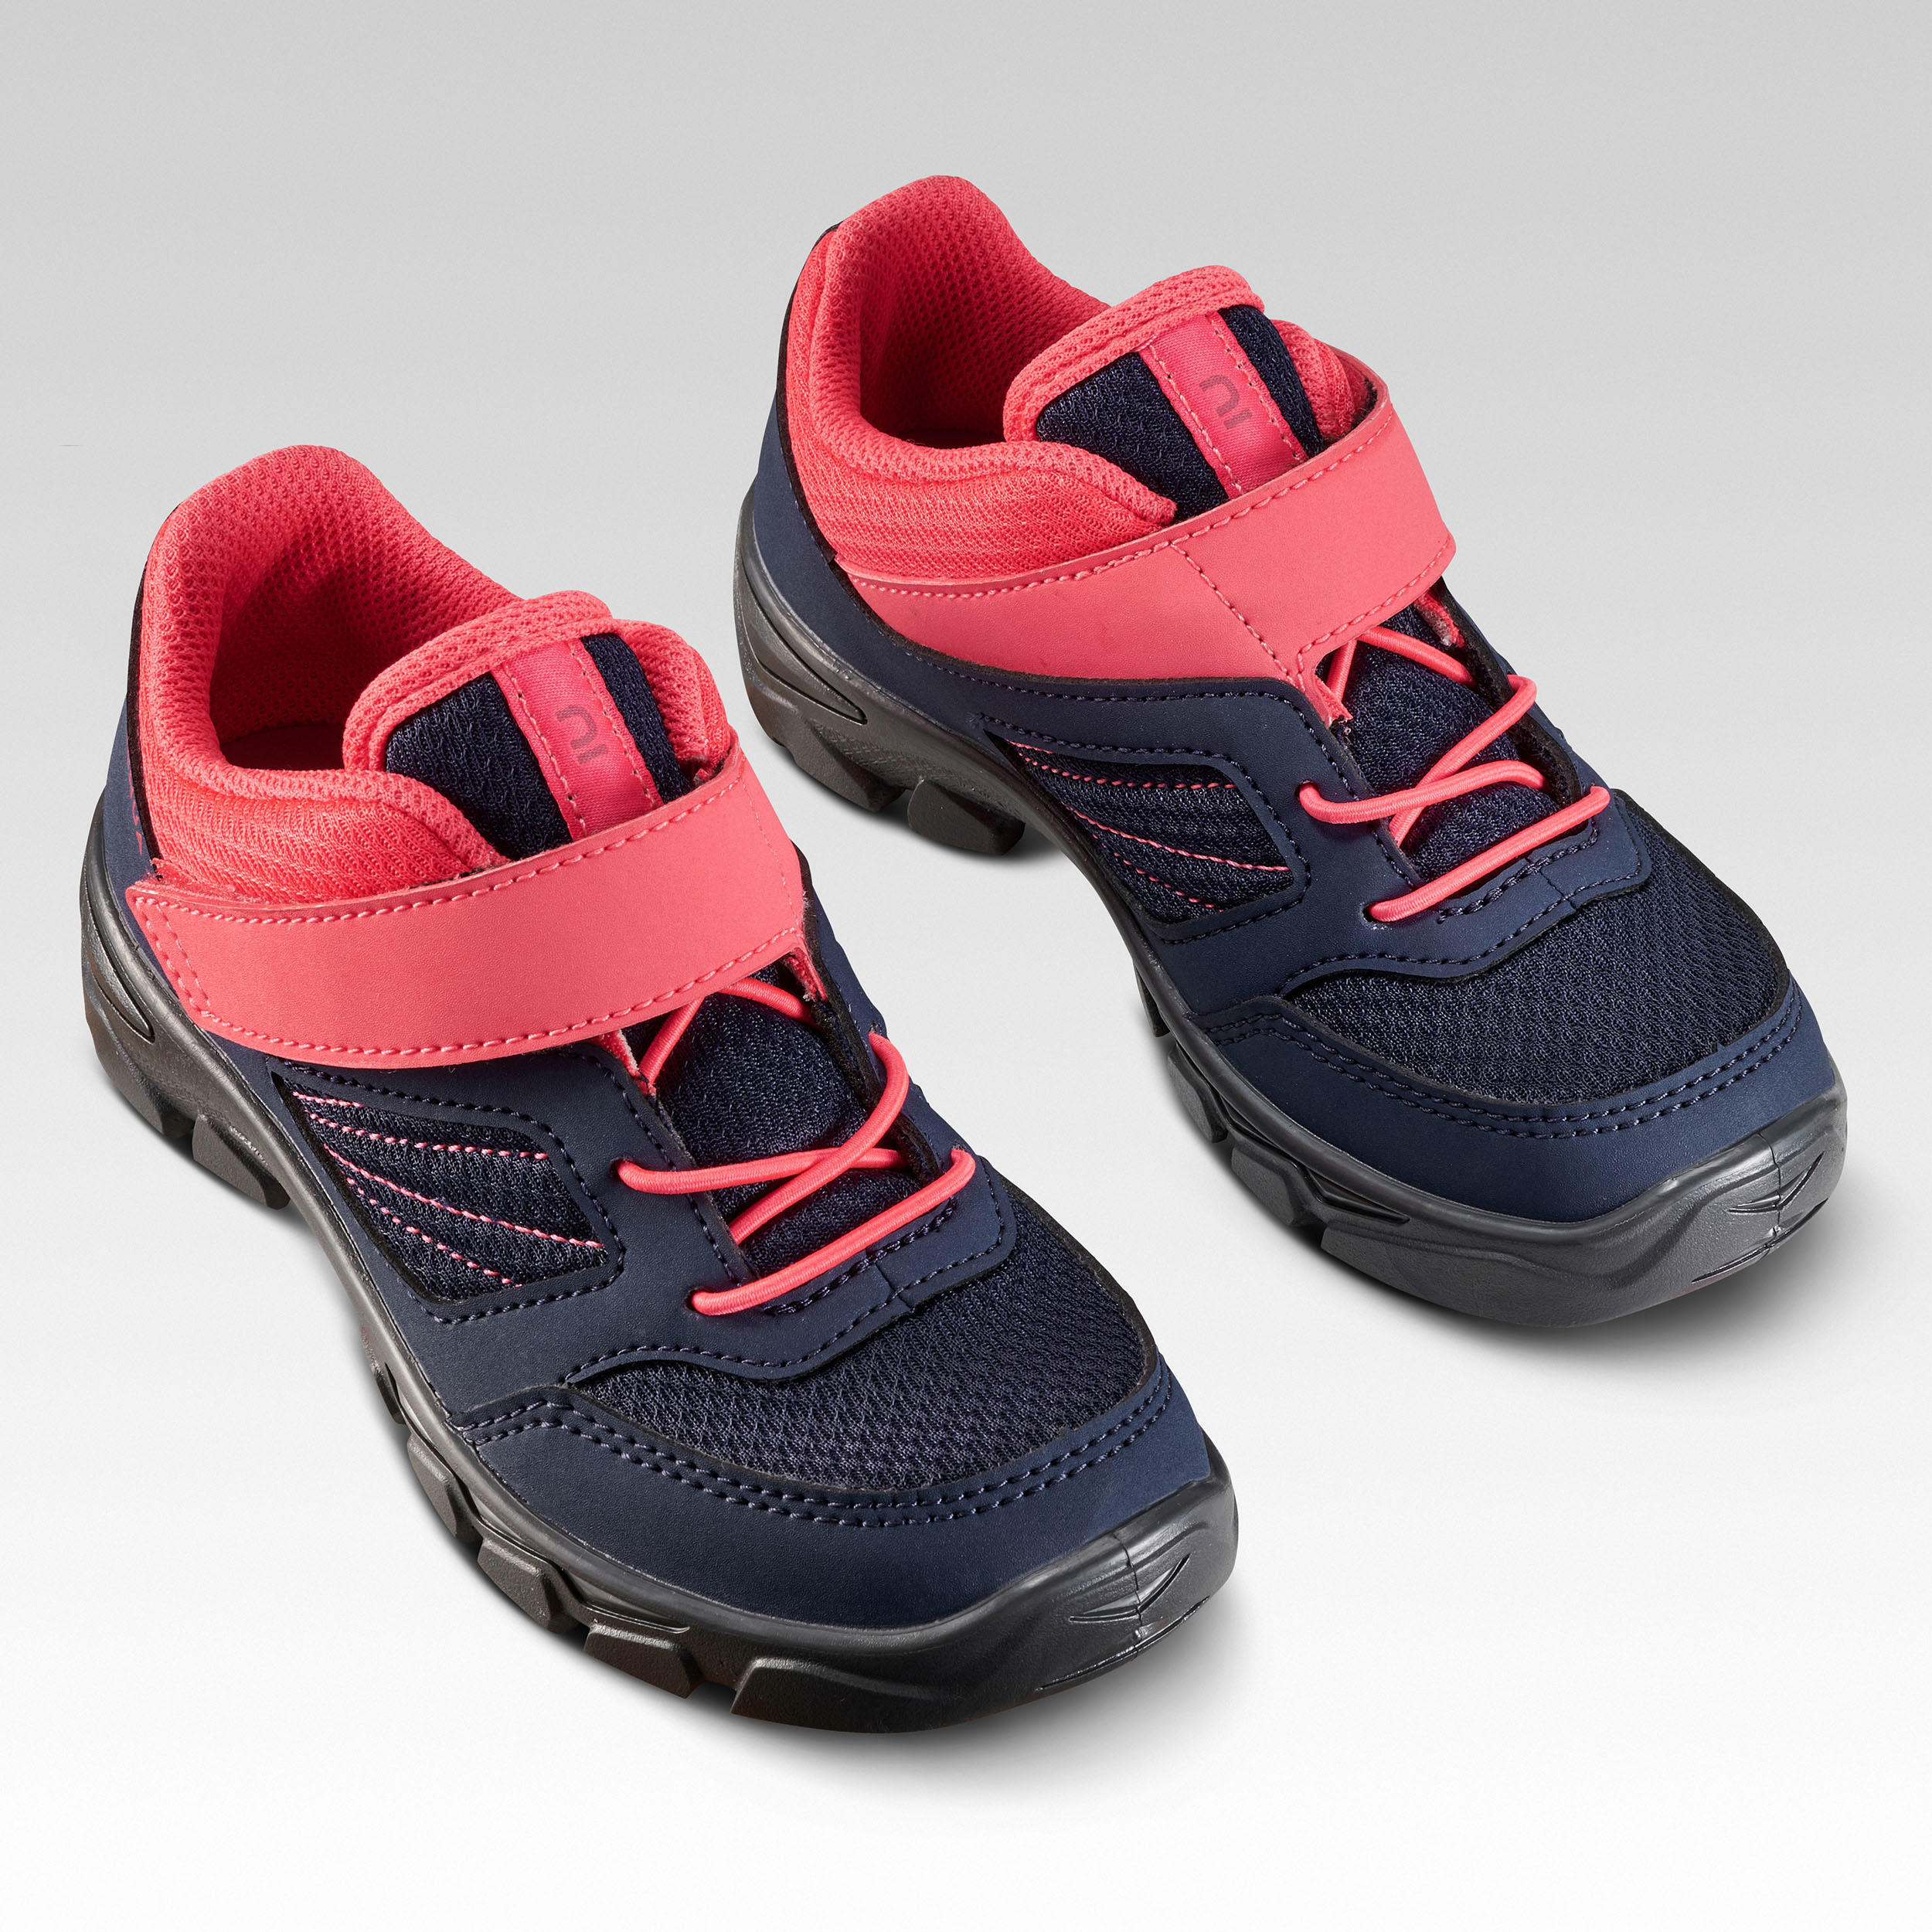 Kids’ Hiking Shoes with Rip-tab MH100 from Jr size 7 to Adult size 2 Blue & Pink 6/8